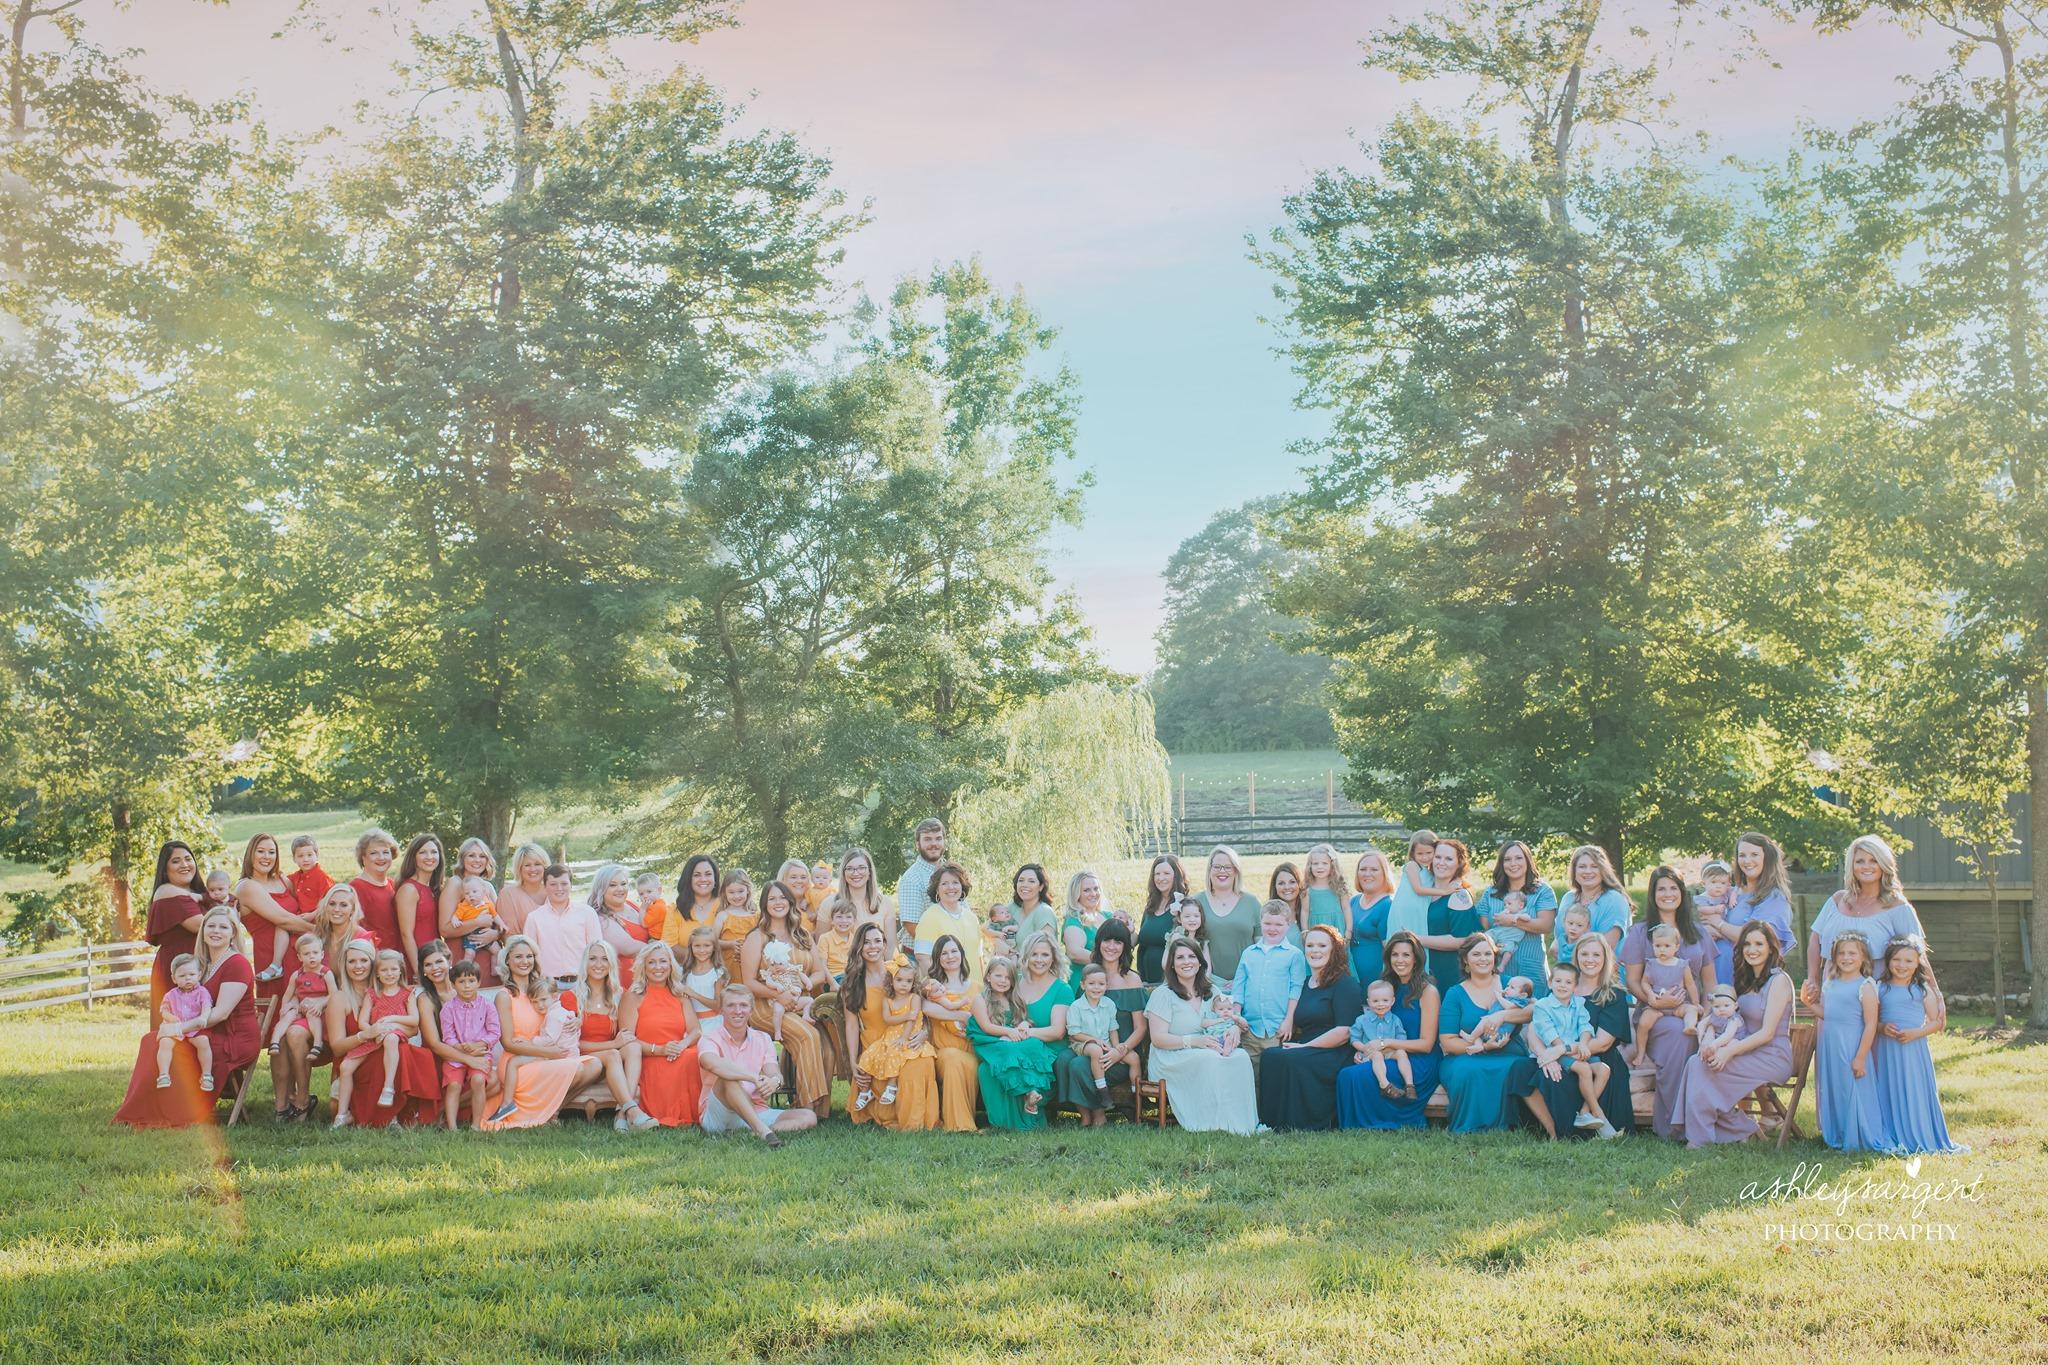 Each woman also shared their individual stories (Ashley Sargent Photography LLC)